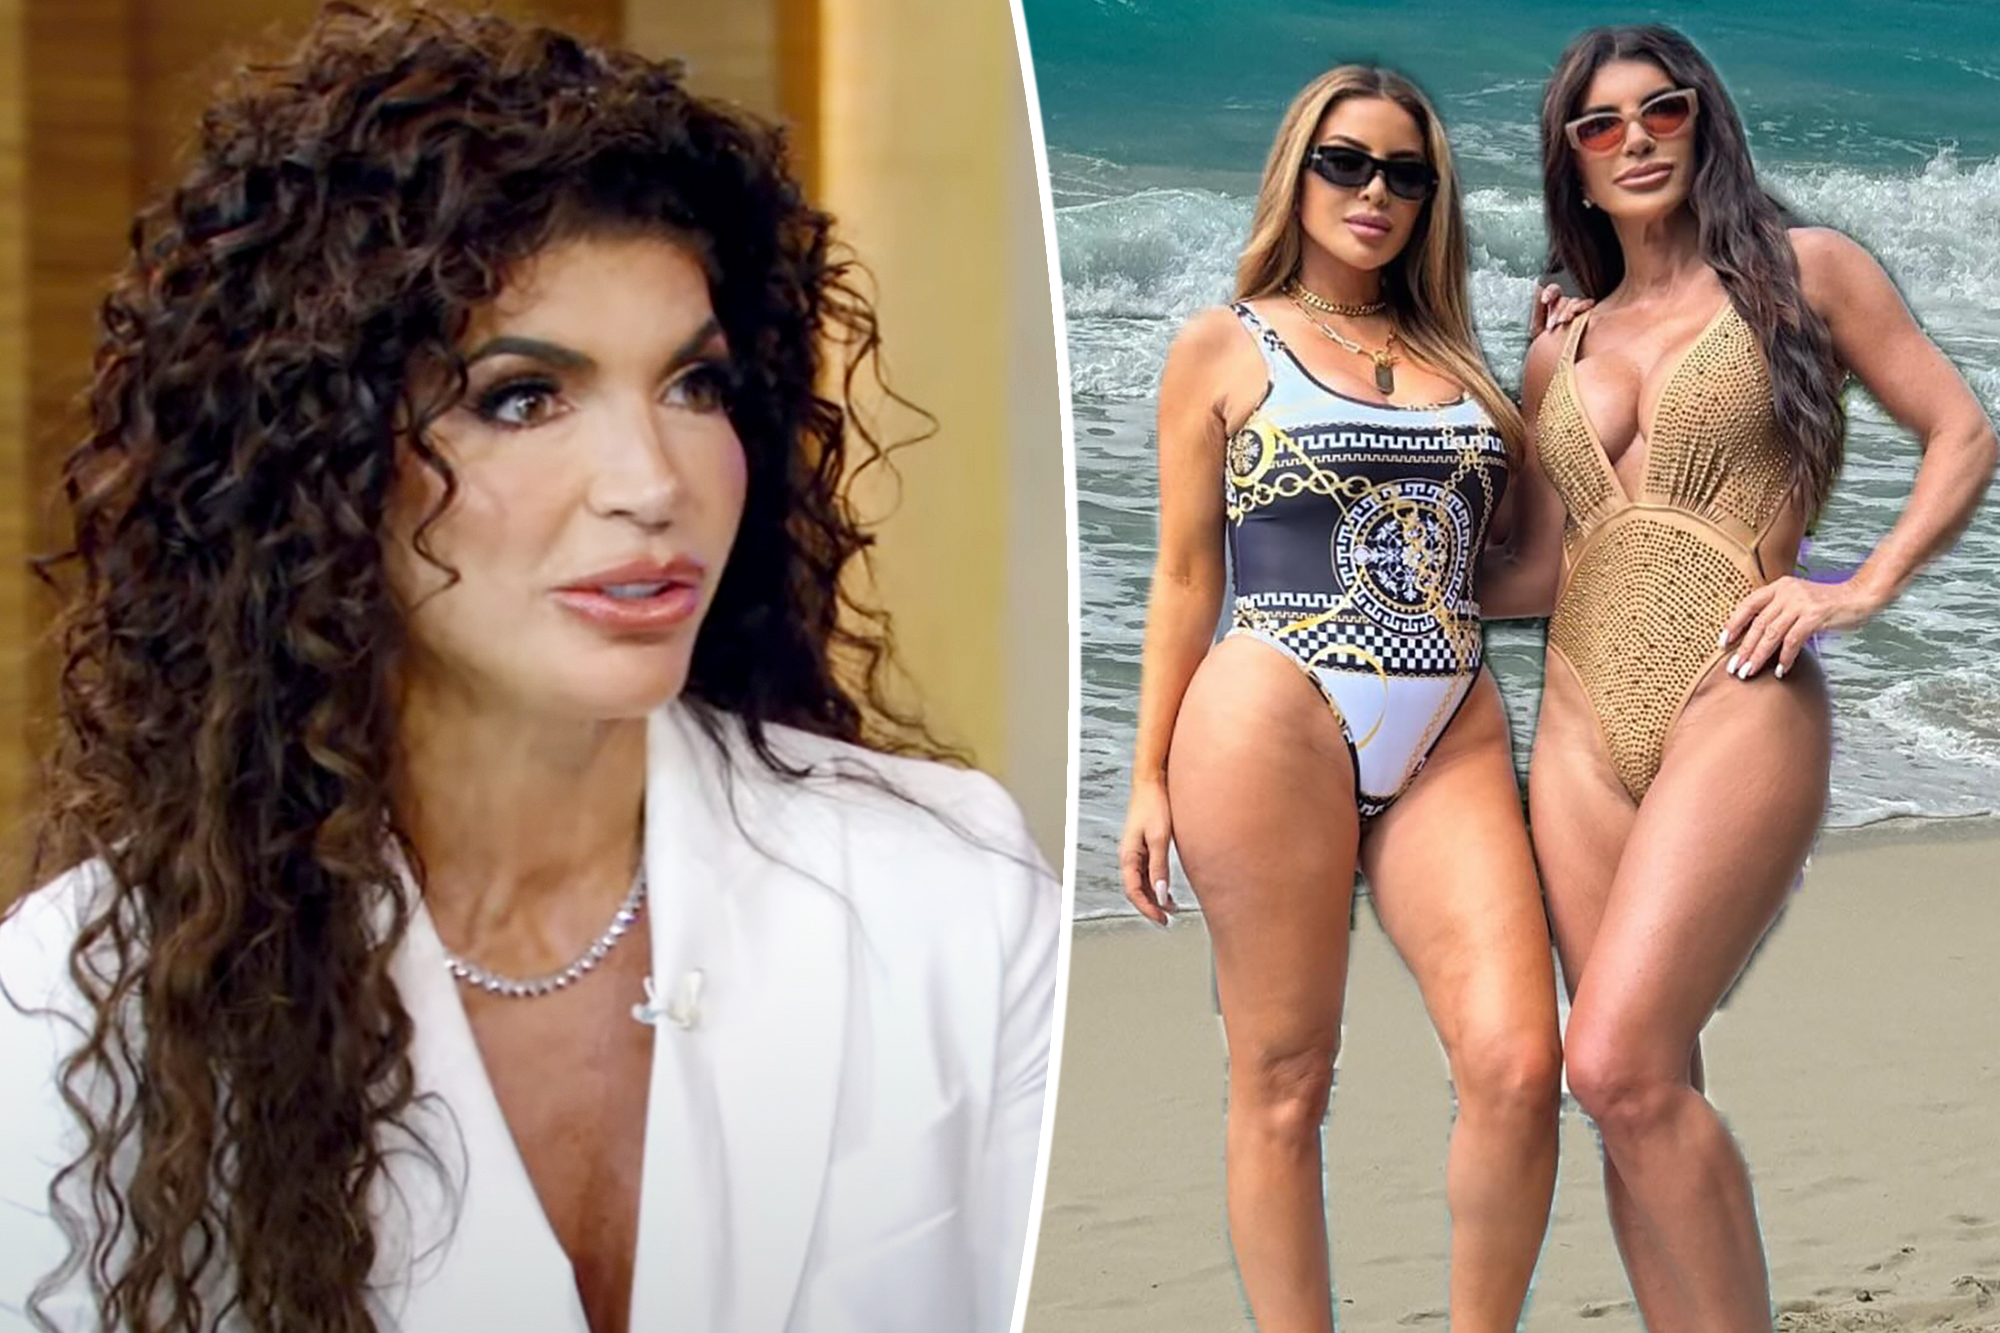 Teresa Giudice's Hilarious Photoshop Fail with Larsa Pippen: The Inside Scoop!